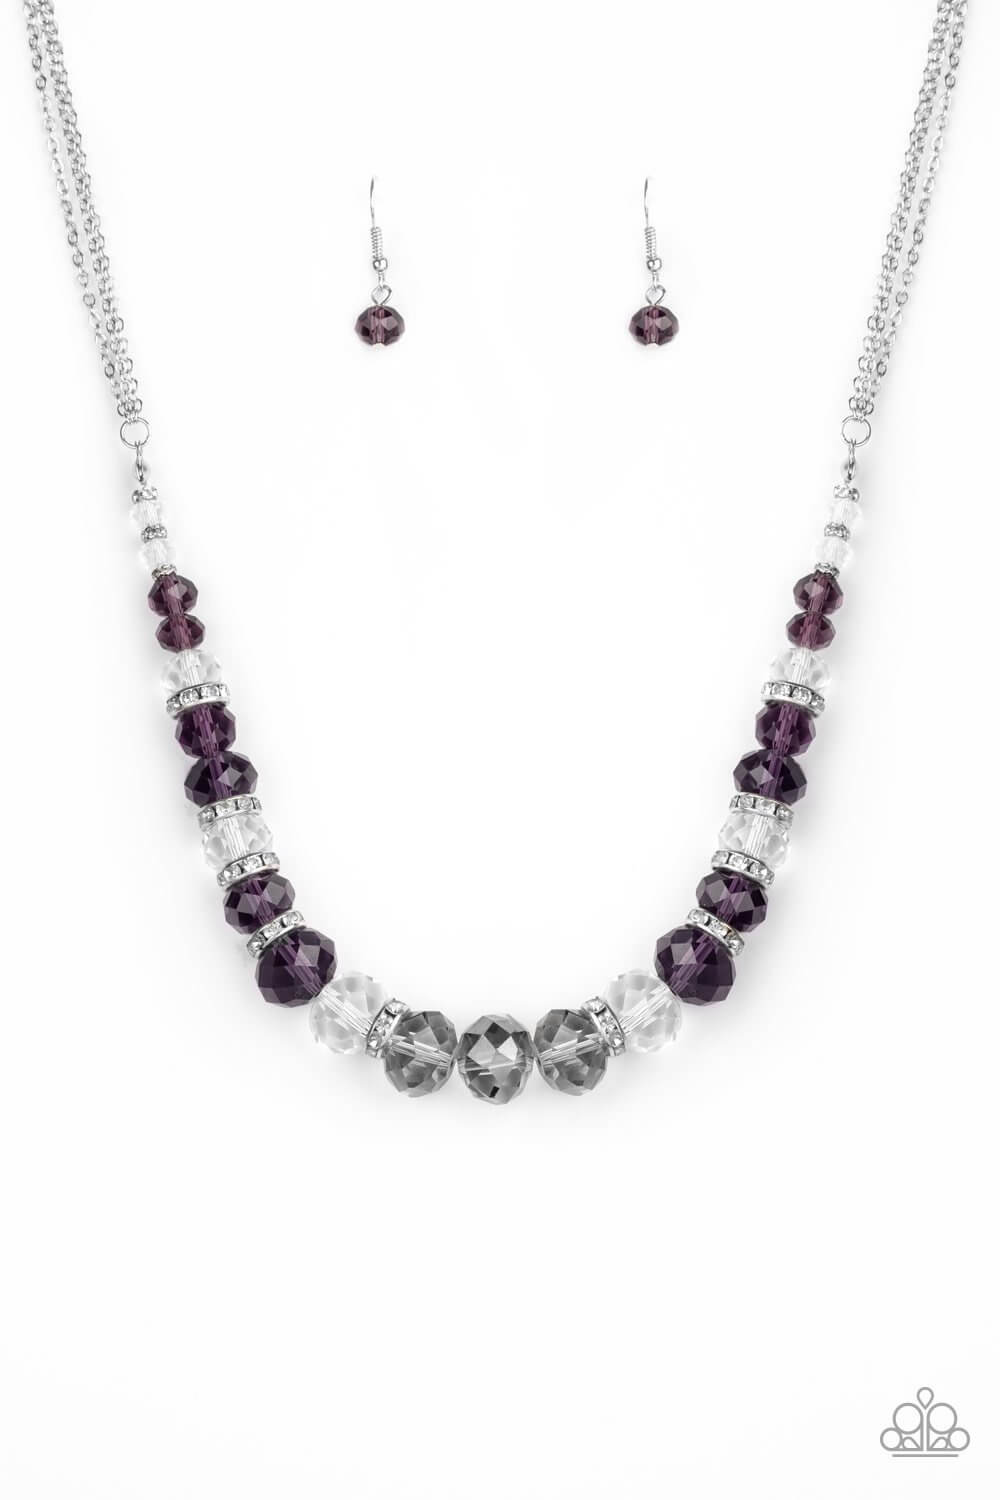 Distracted by Dazzle - Purple Necklace Set - Princess Glam Shop